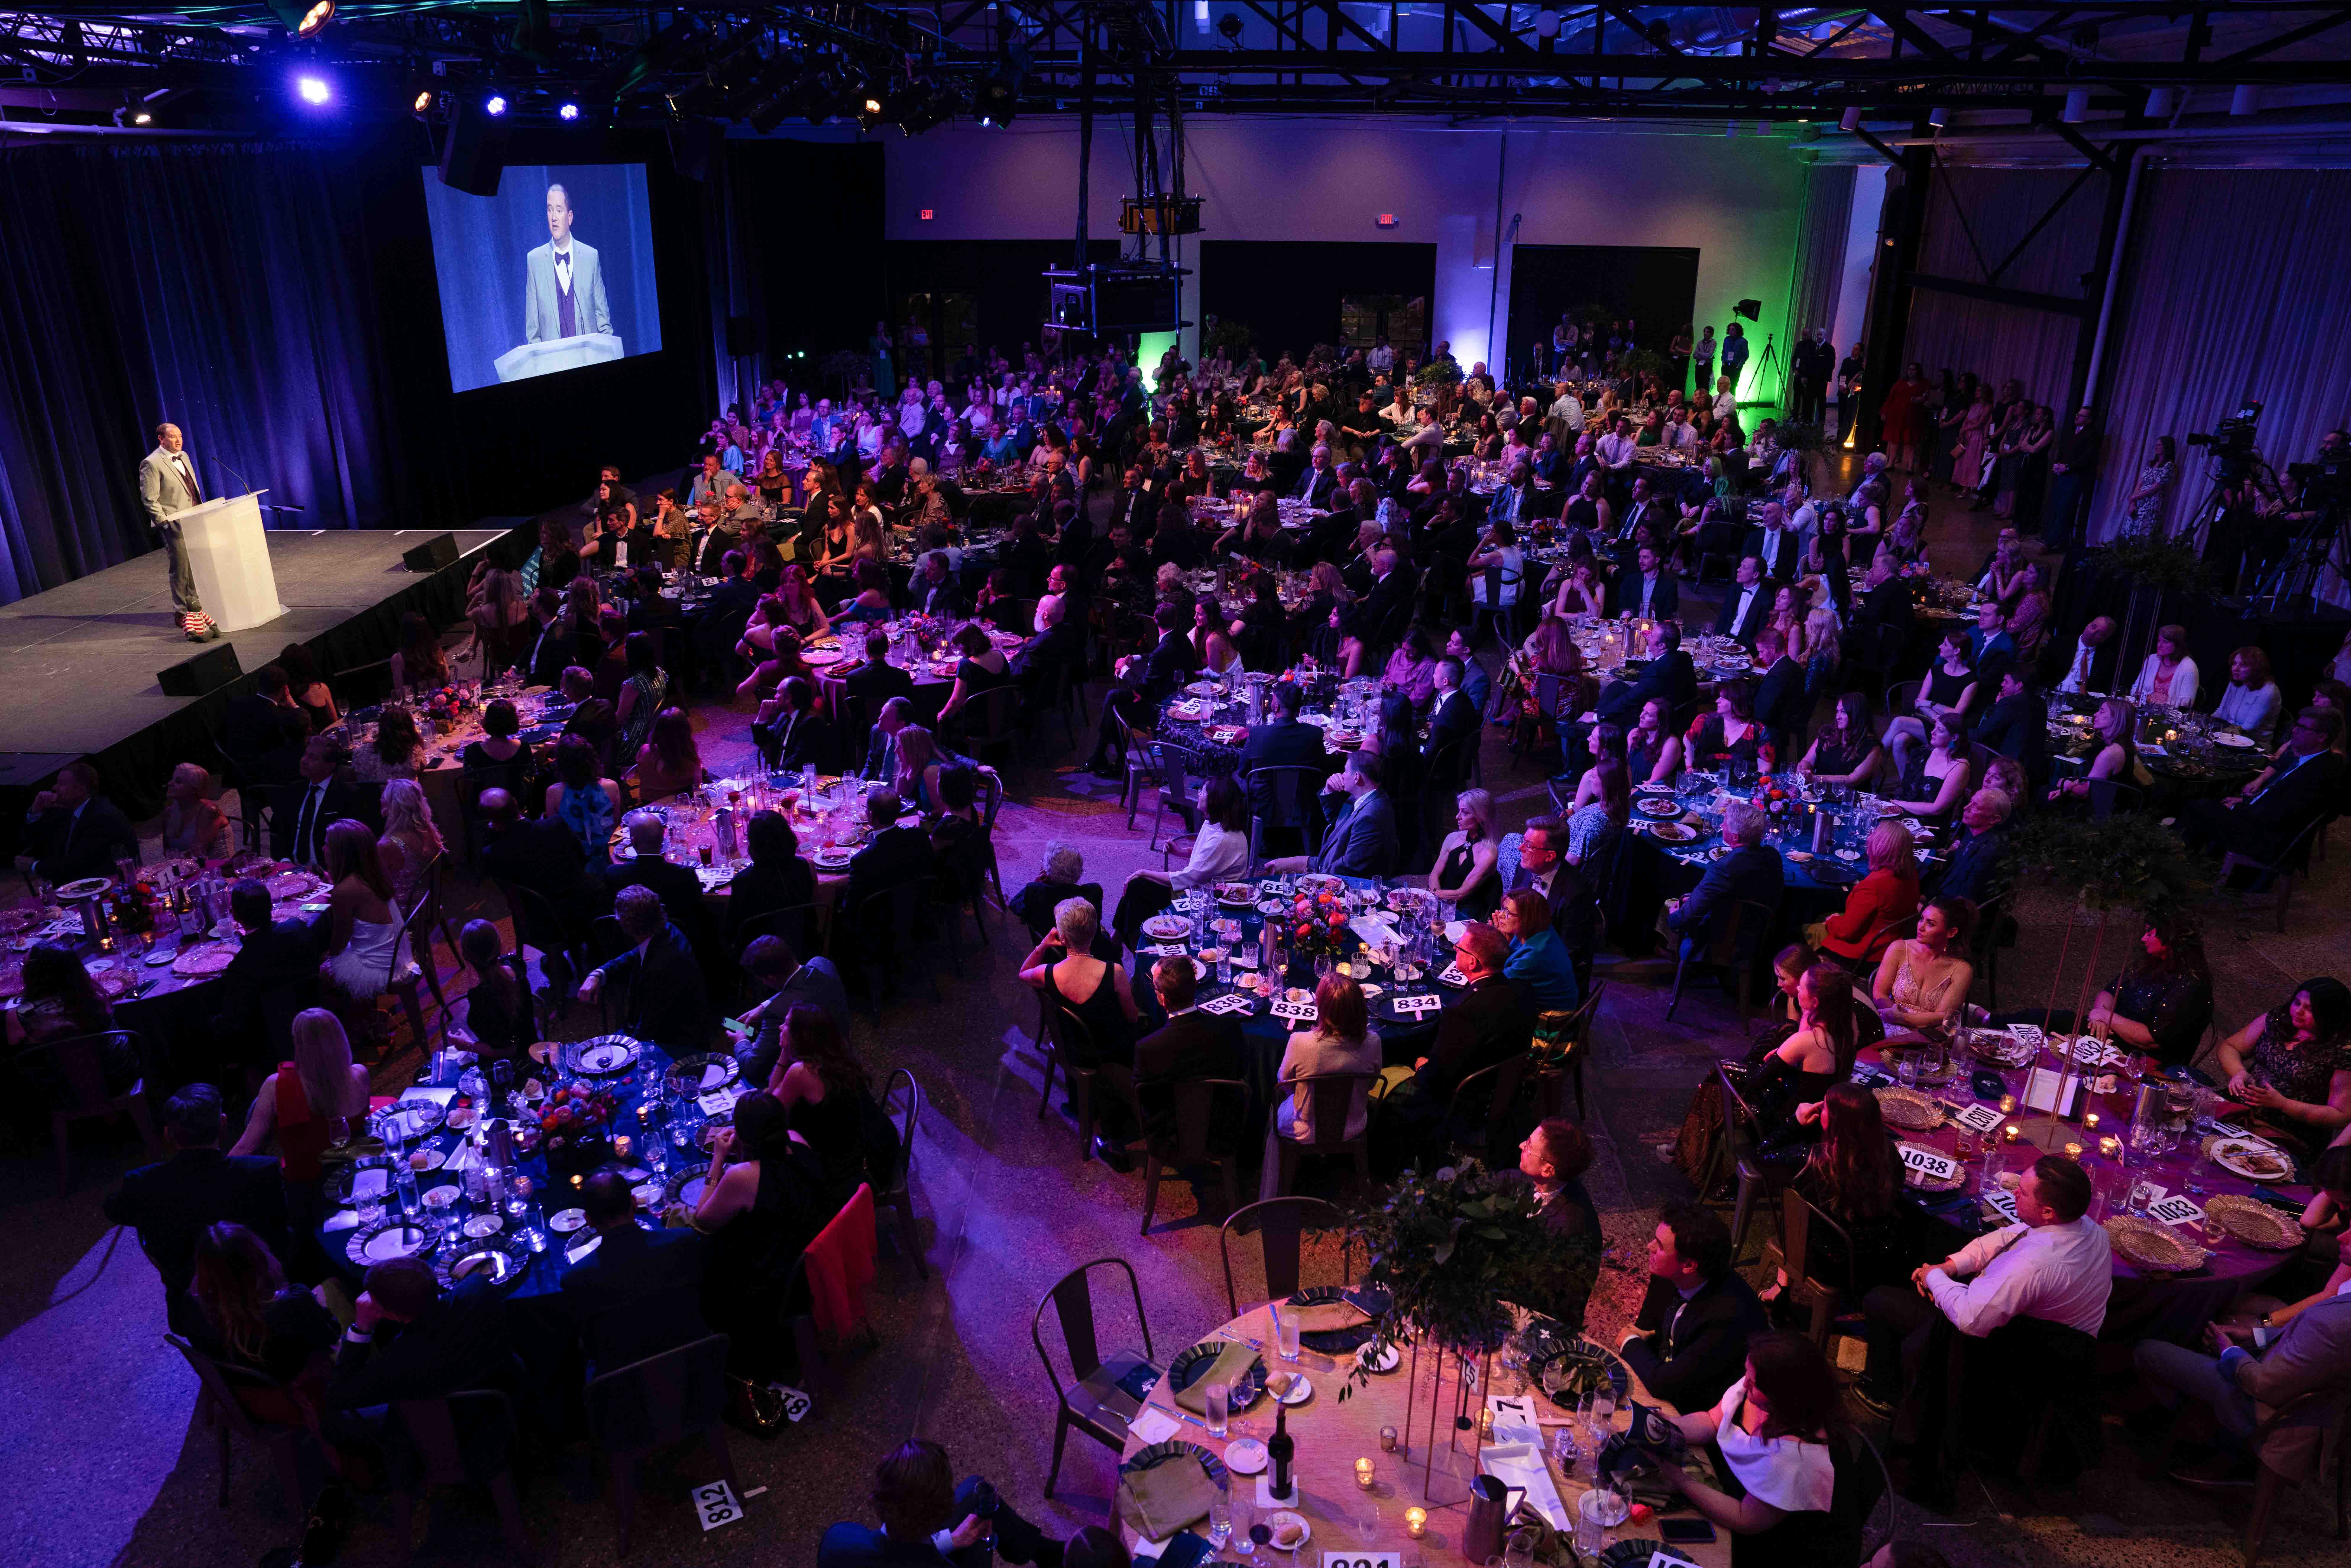 Dreams Will Come True Thanks to Children’s Cancer Research Fund (CCRF) and the DREAM GALA